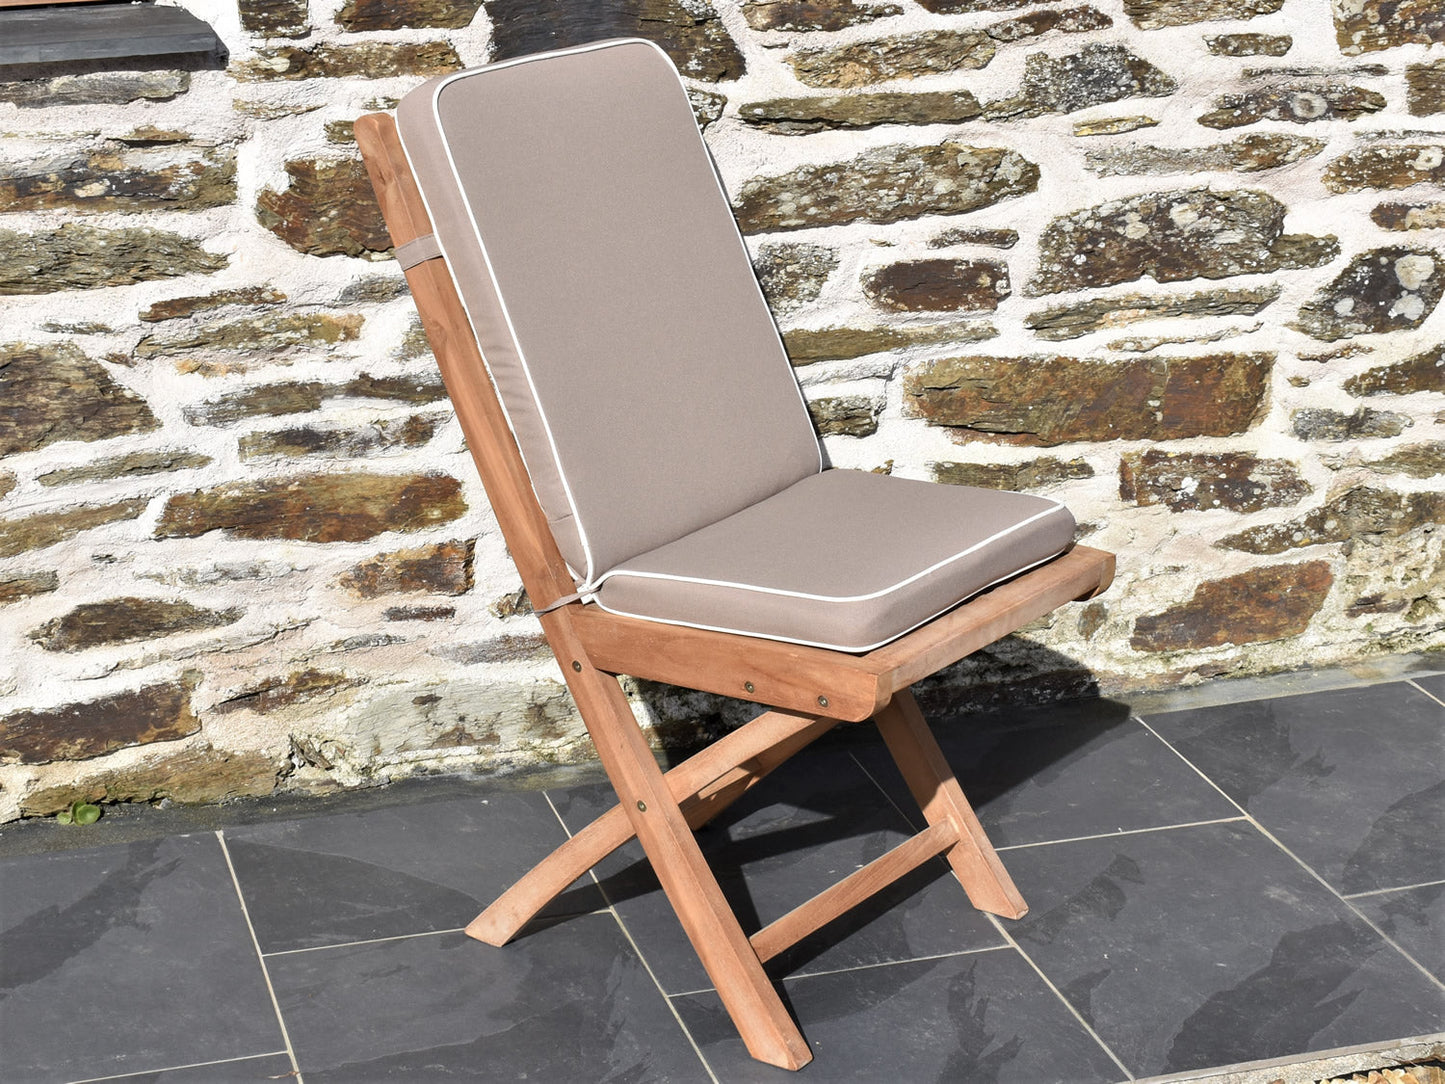 Luxury taupe colour folding seat pad and back cushion, perfect for folding teak garden chairs